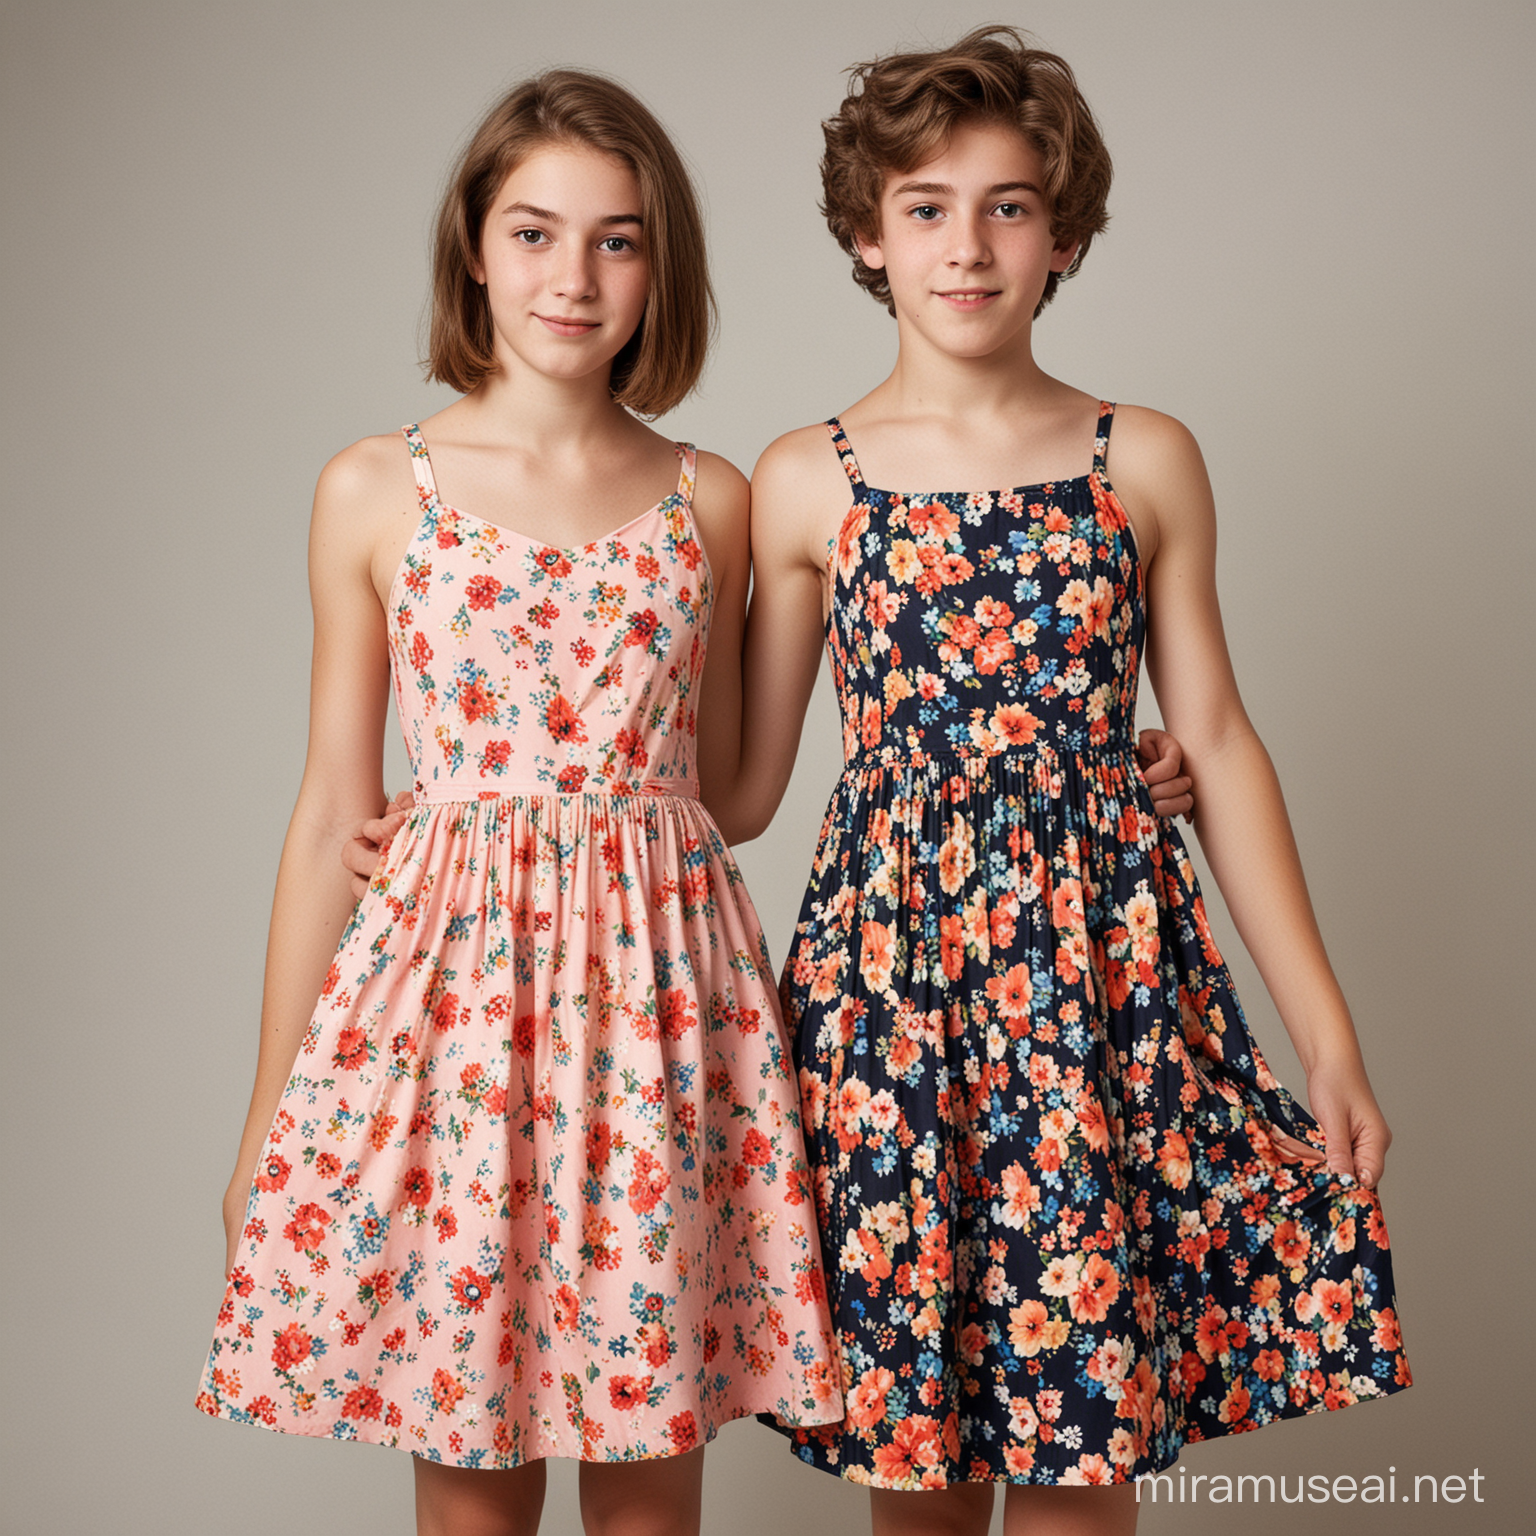 a teenage boy is forced to wear a floral summer dress on his sister's birthday